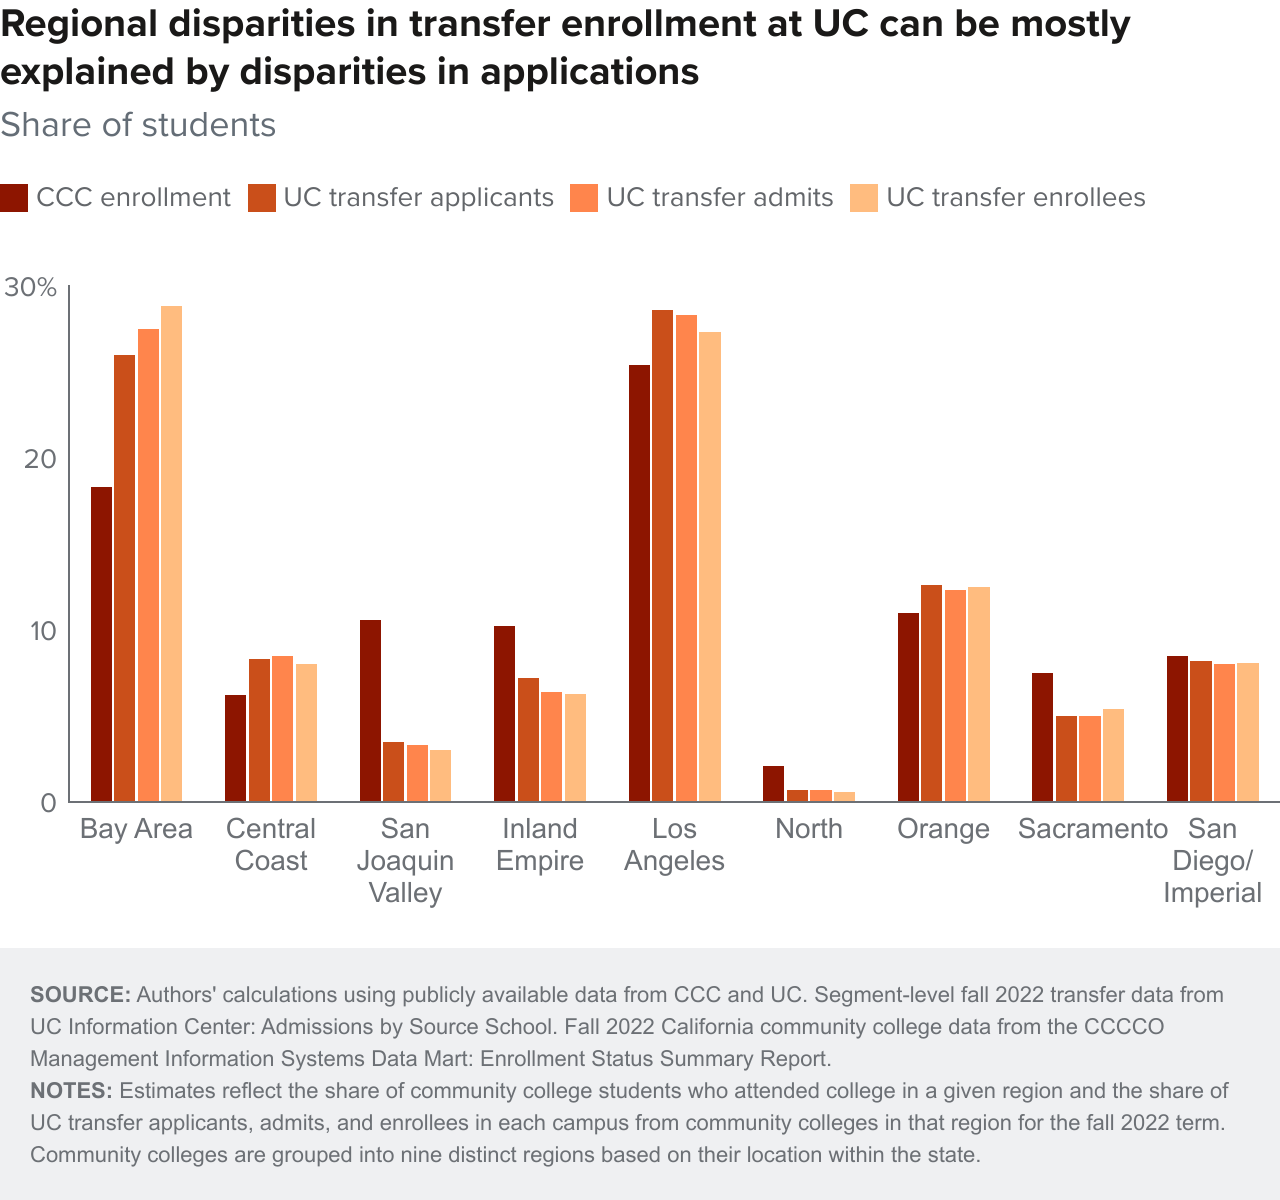 figure 8 - Regional disparities in transfer enrollment at UC can be mostly explained by disparities in applications